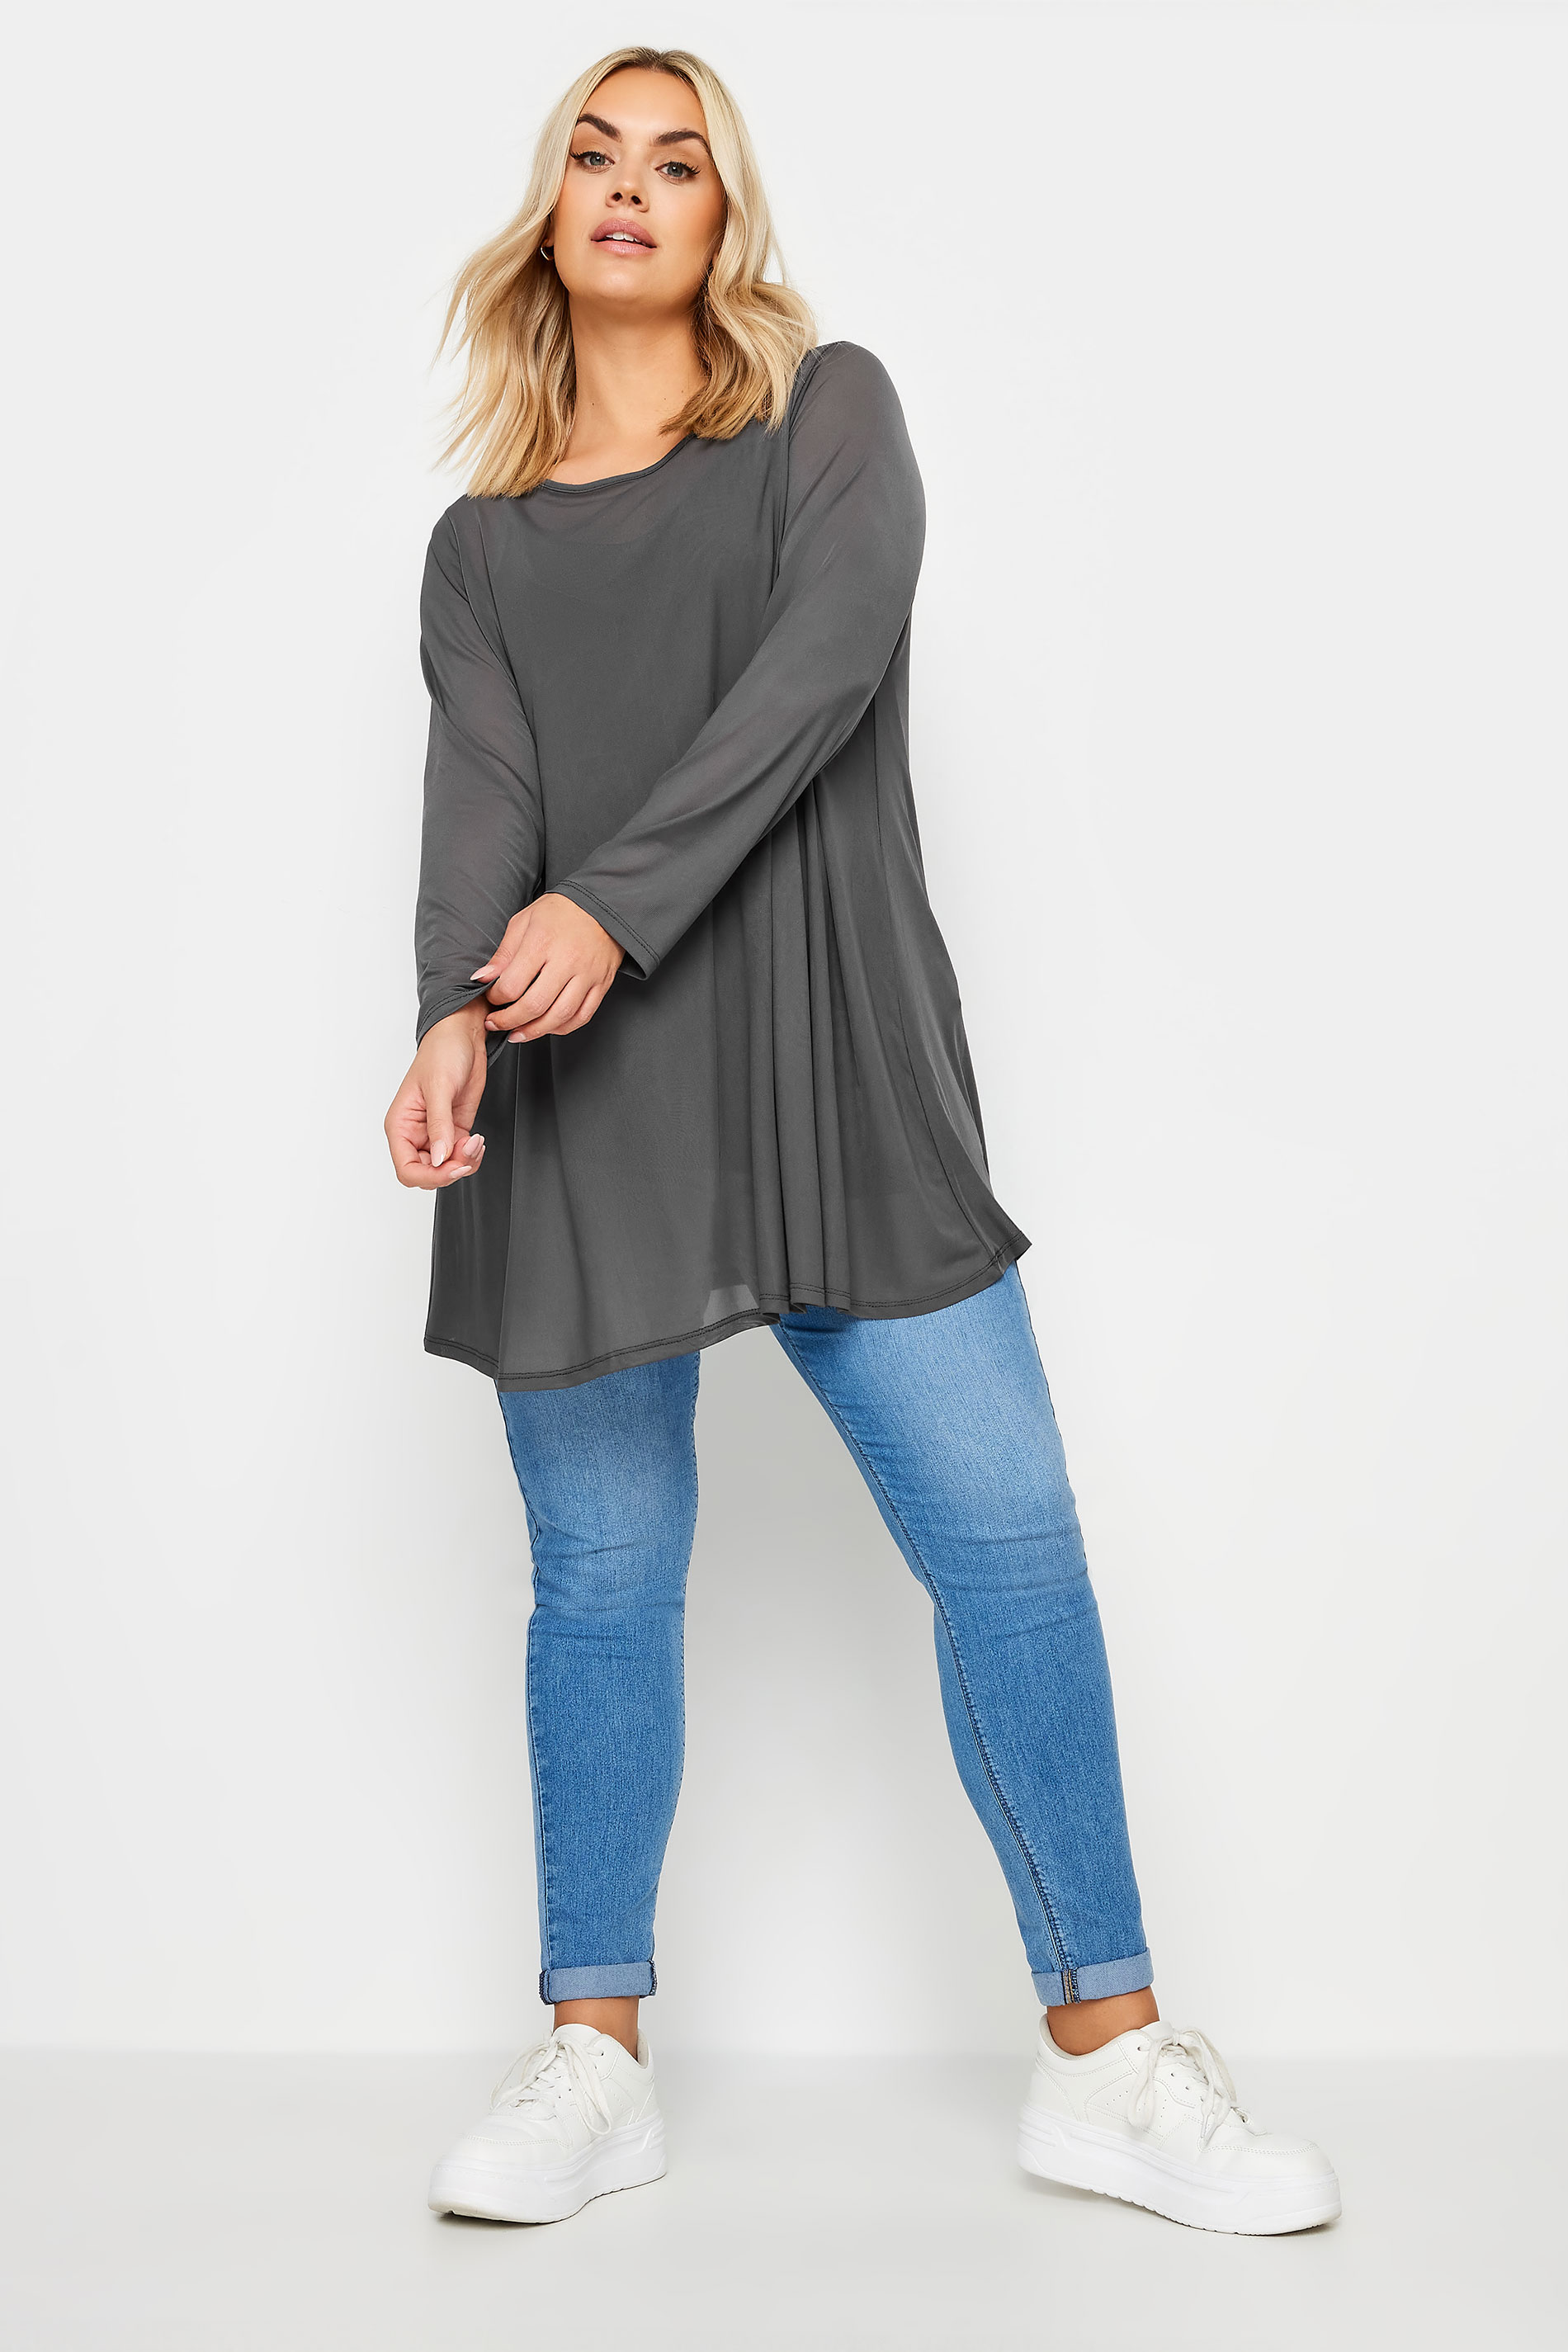 YOURS Plus Size Grey Mesh Swing Top | Yours Clothing 2